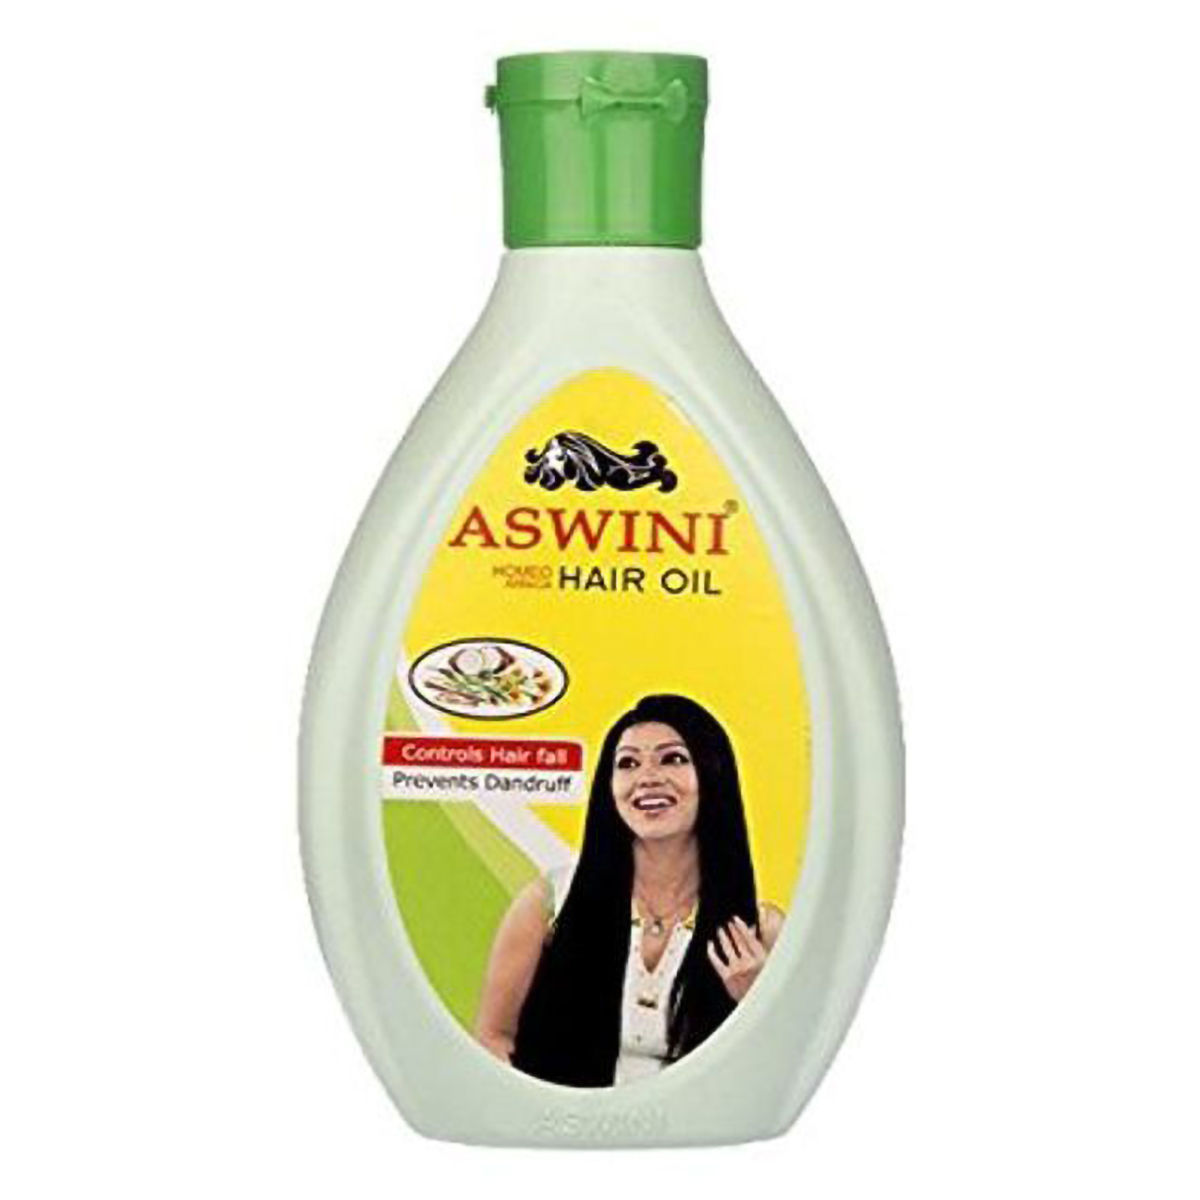 WOW Skin Science Red Onion Black Seed Oil Shampoo 100ml Uses Price  Dosage Side Effects Substitute Buy Online